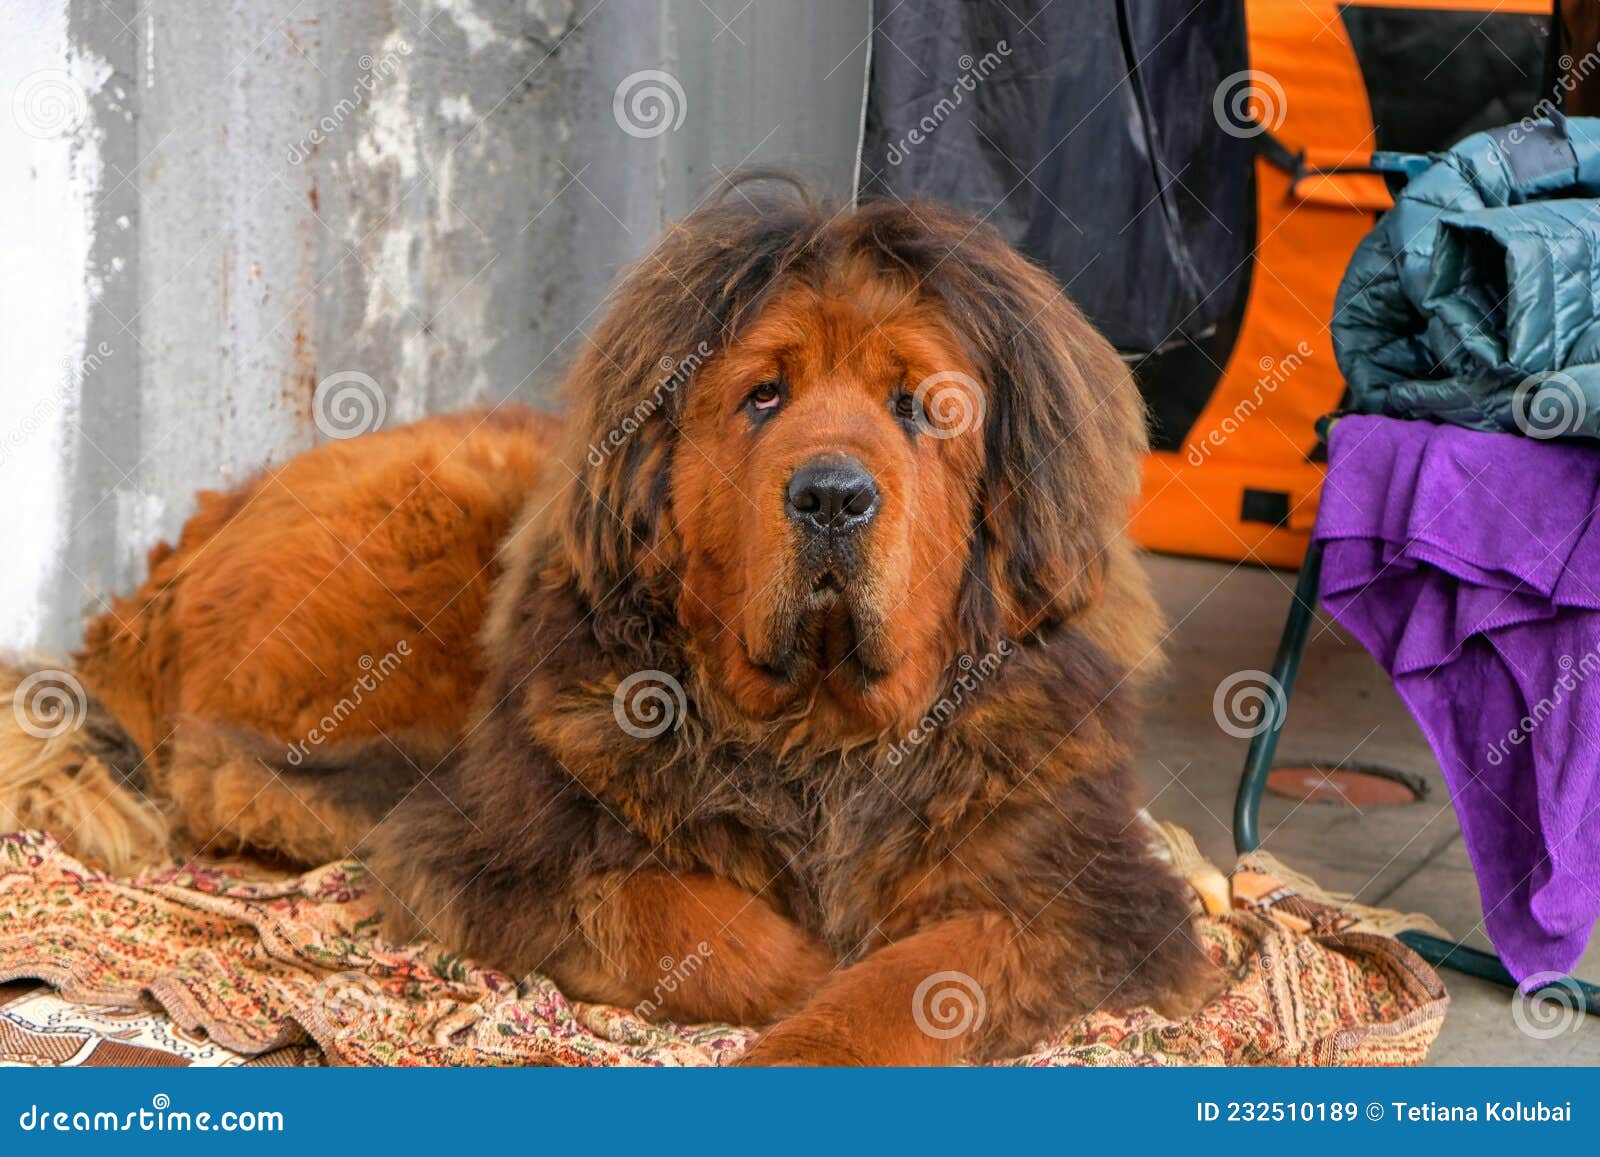 Tibetan Mastiff Puppy of Red Color Close-up. Stock Image - Image of funny,  themes: 232510189